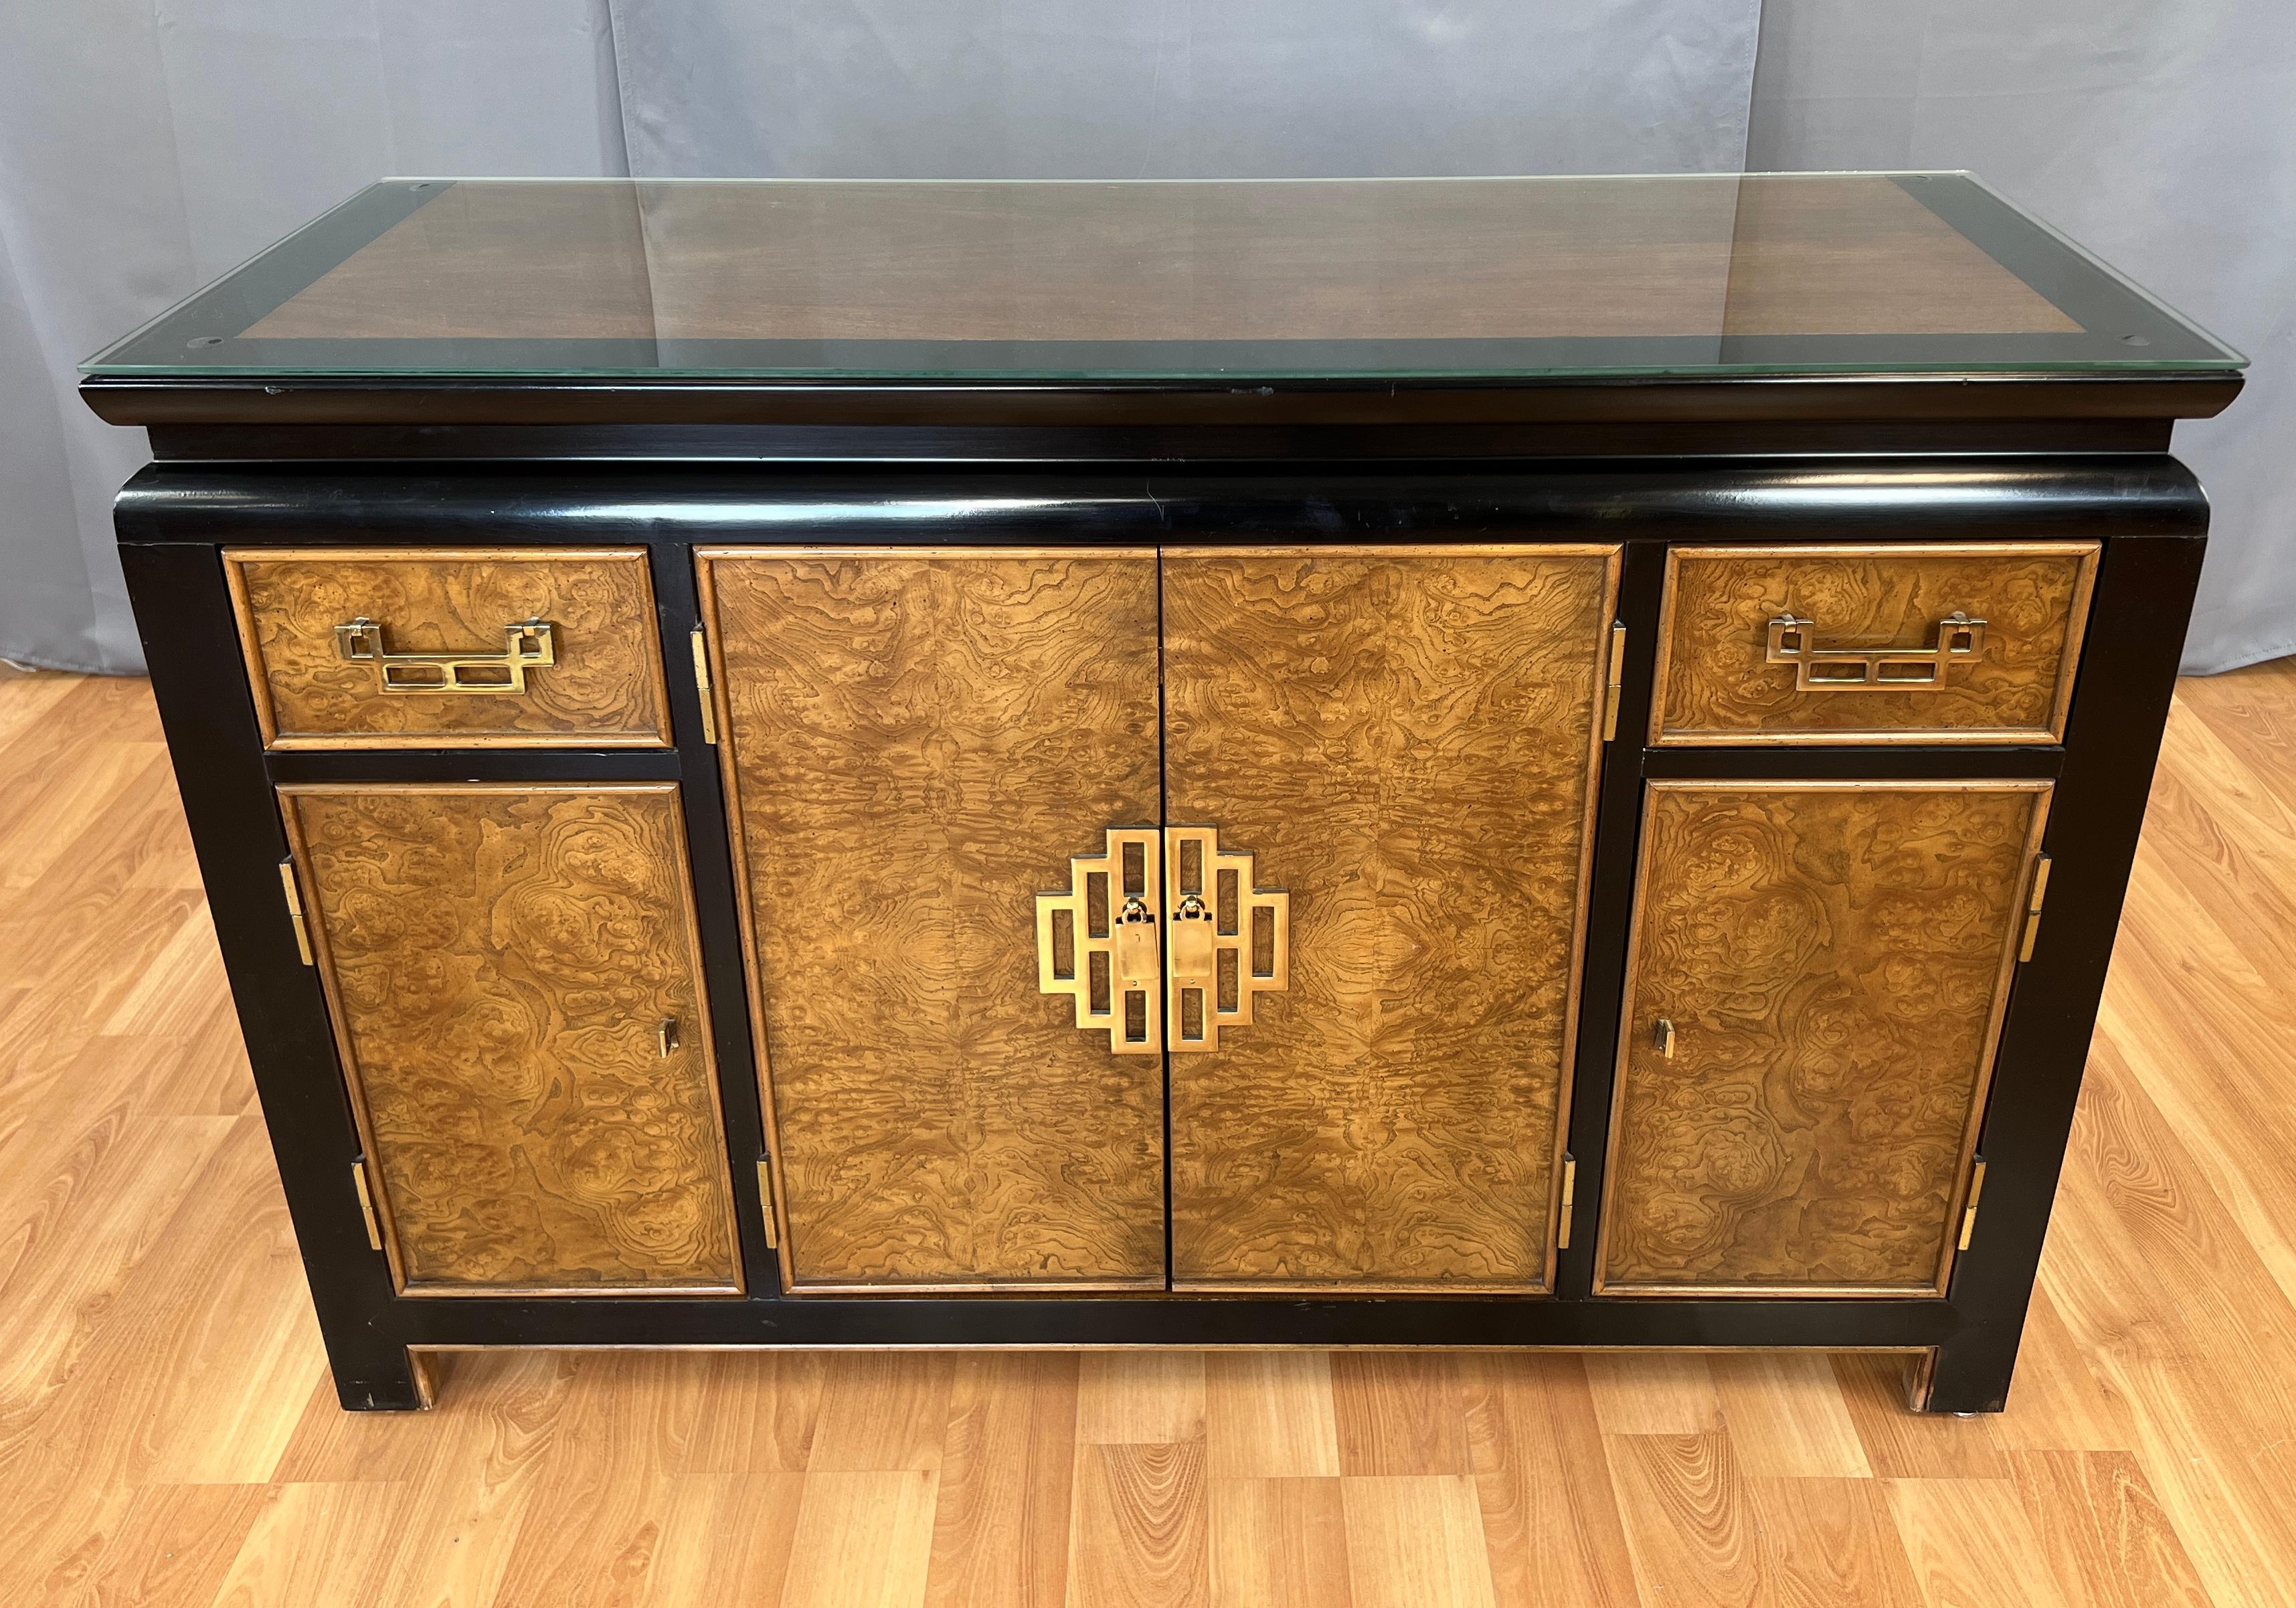 Offered here is a sideboard from the 